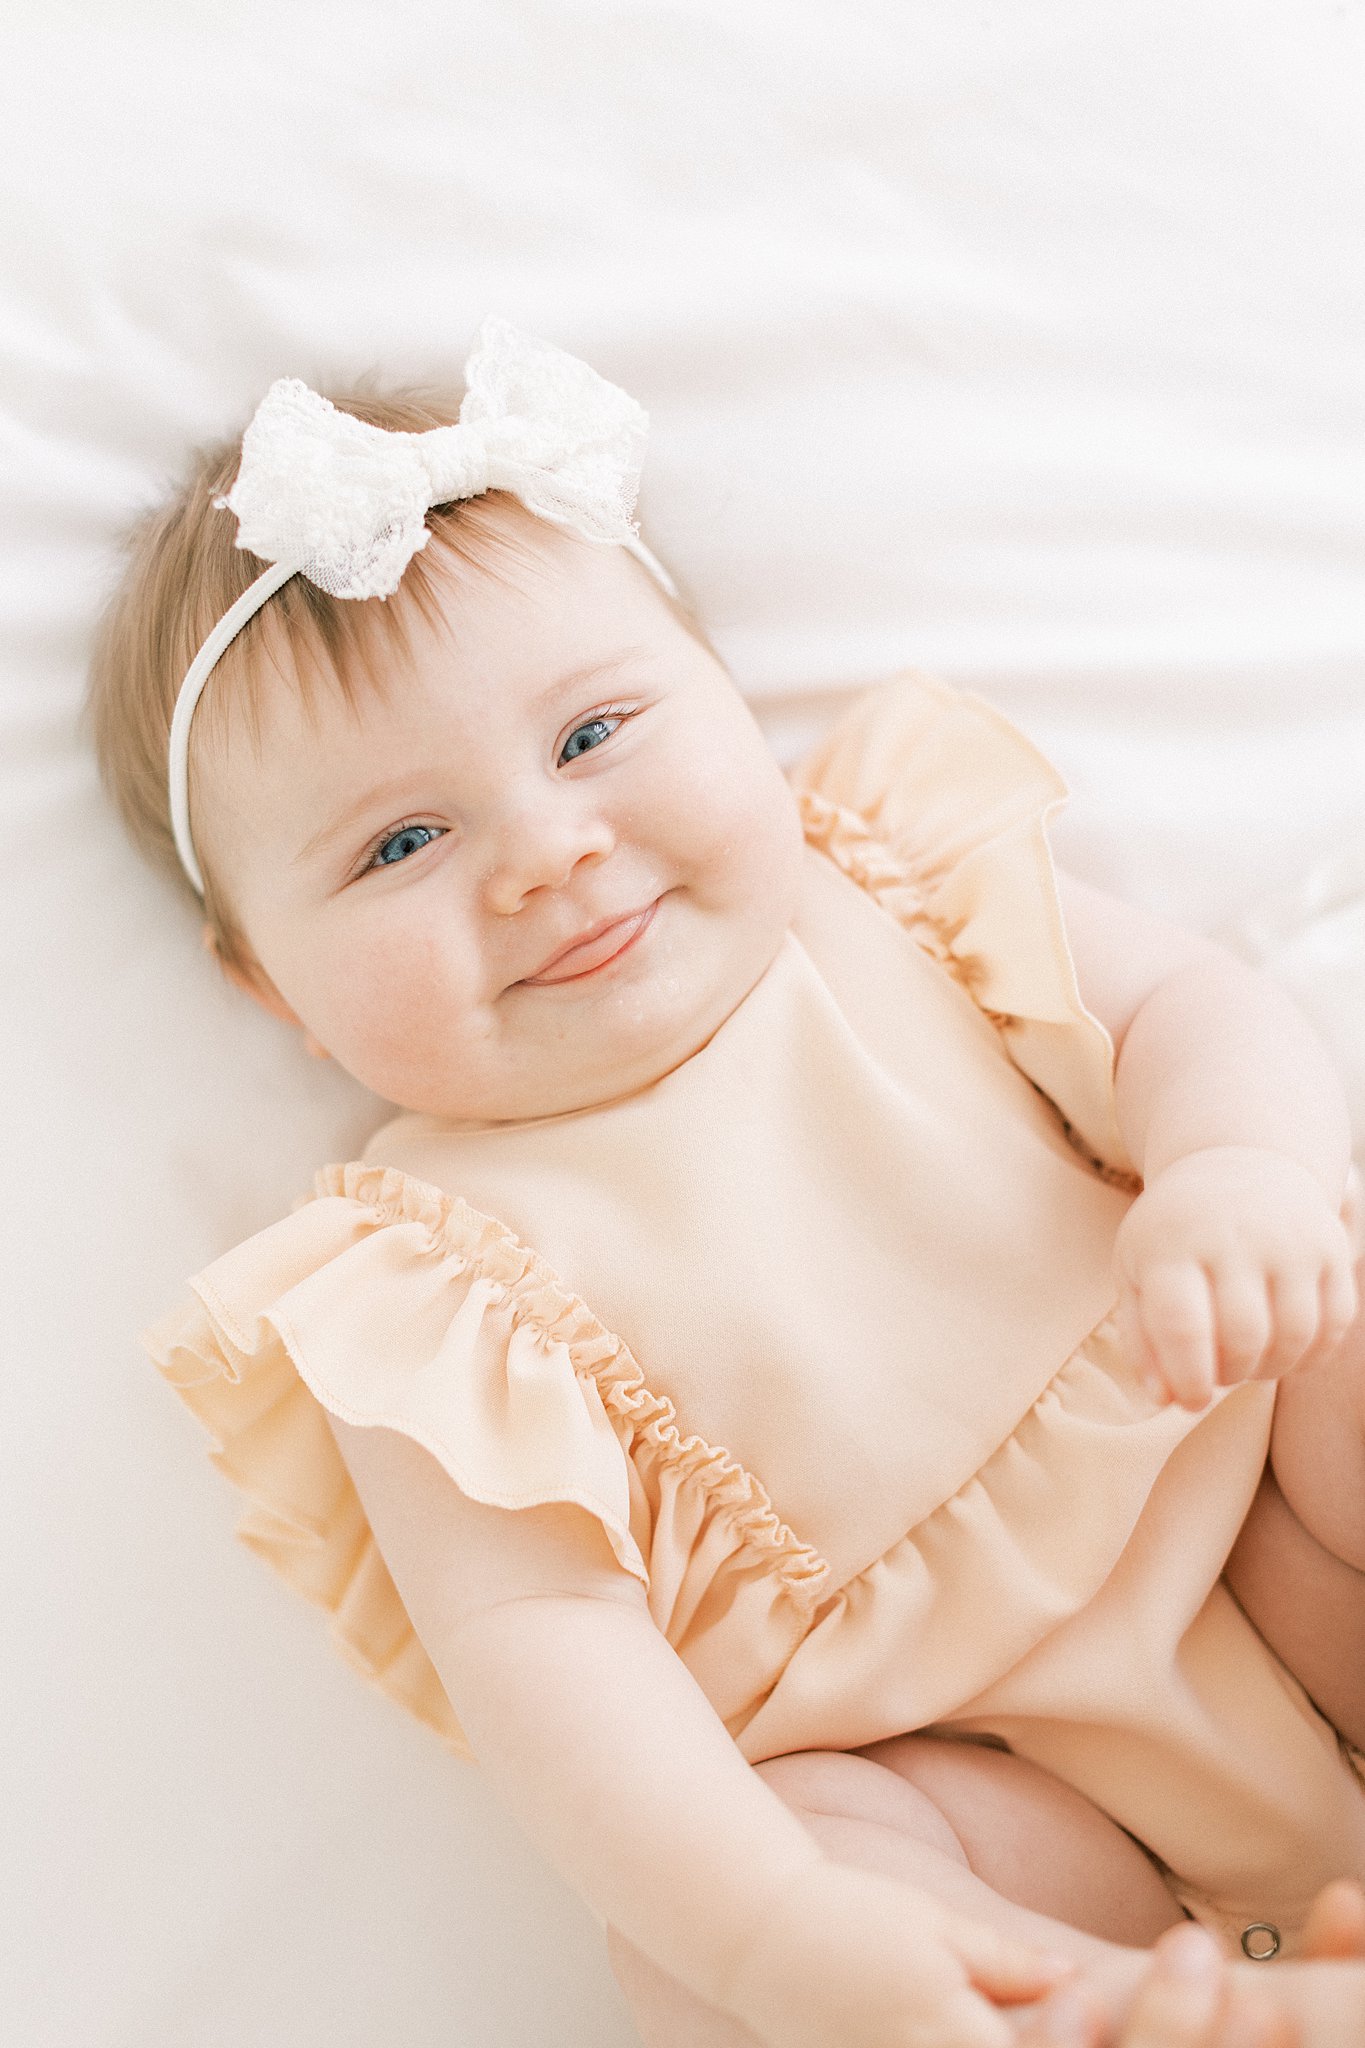 An infant baby in a peach dress lays on a bed smiling and sticking her tongue out